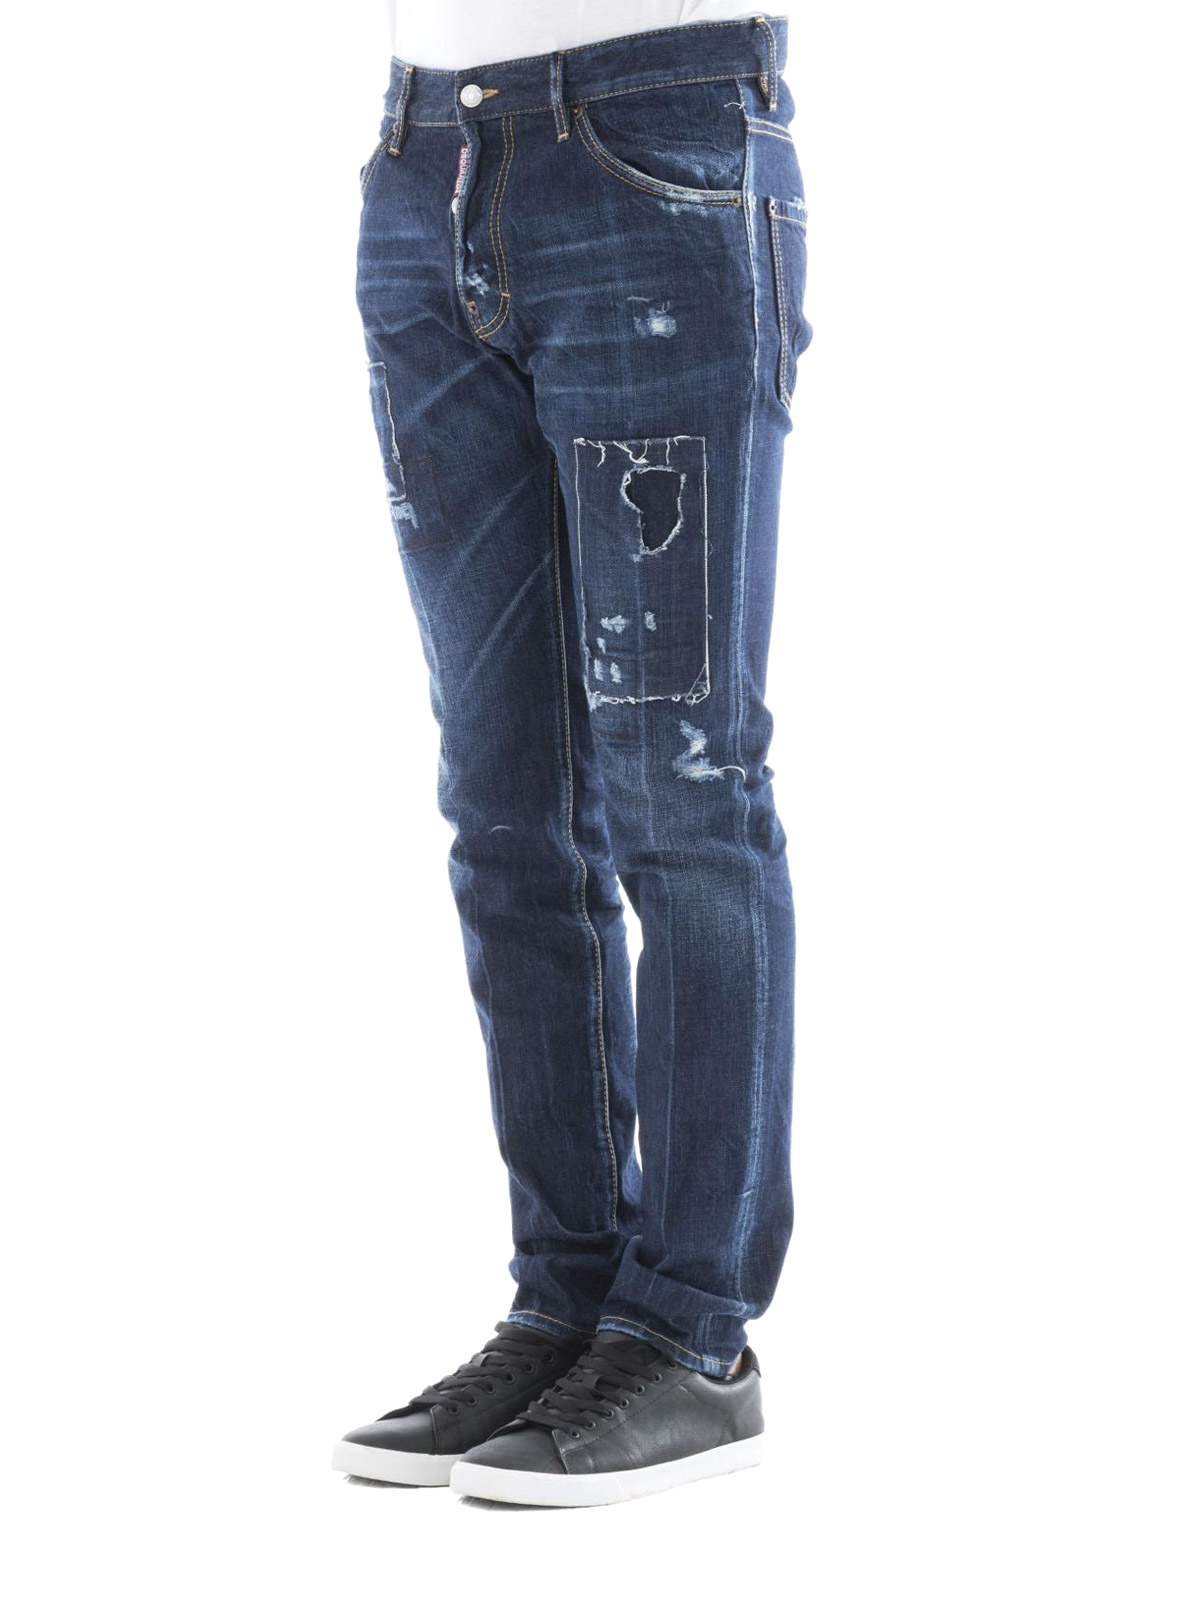 dsquared jeans cool guy fit